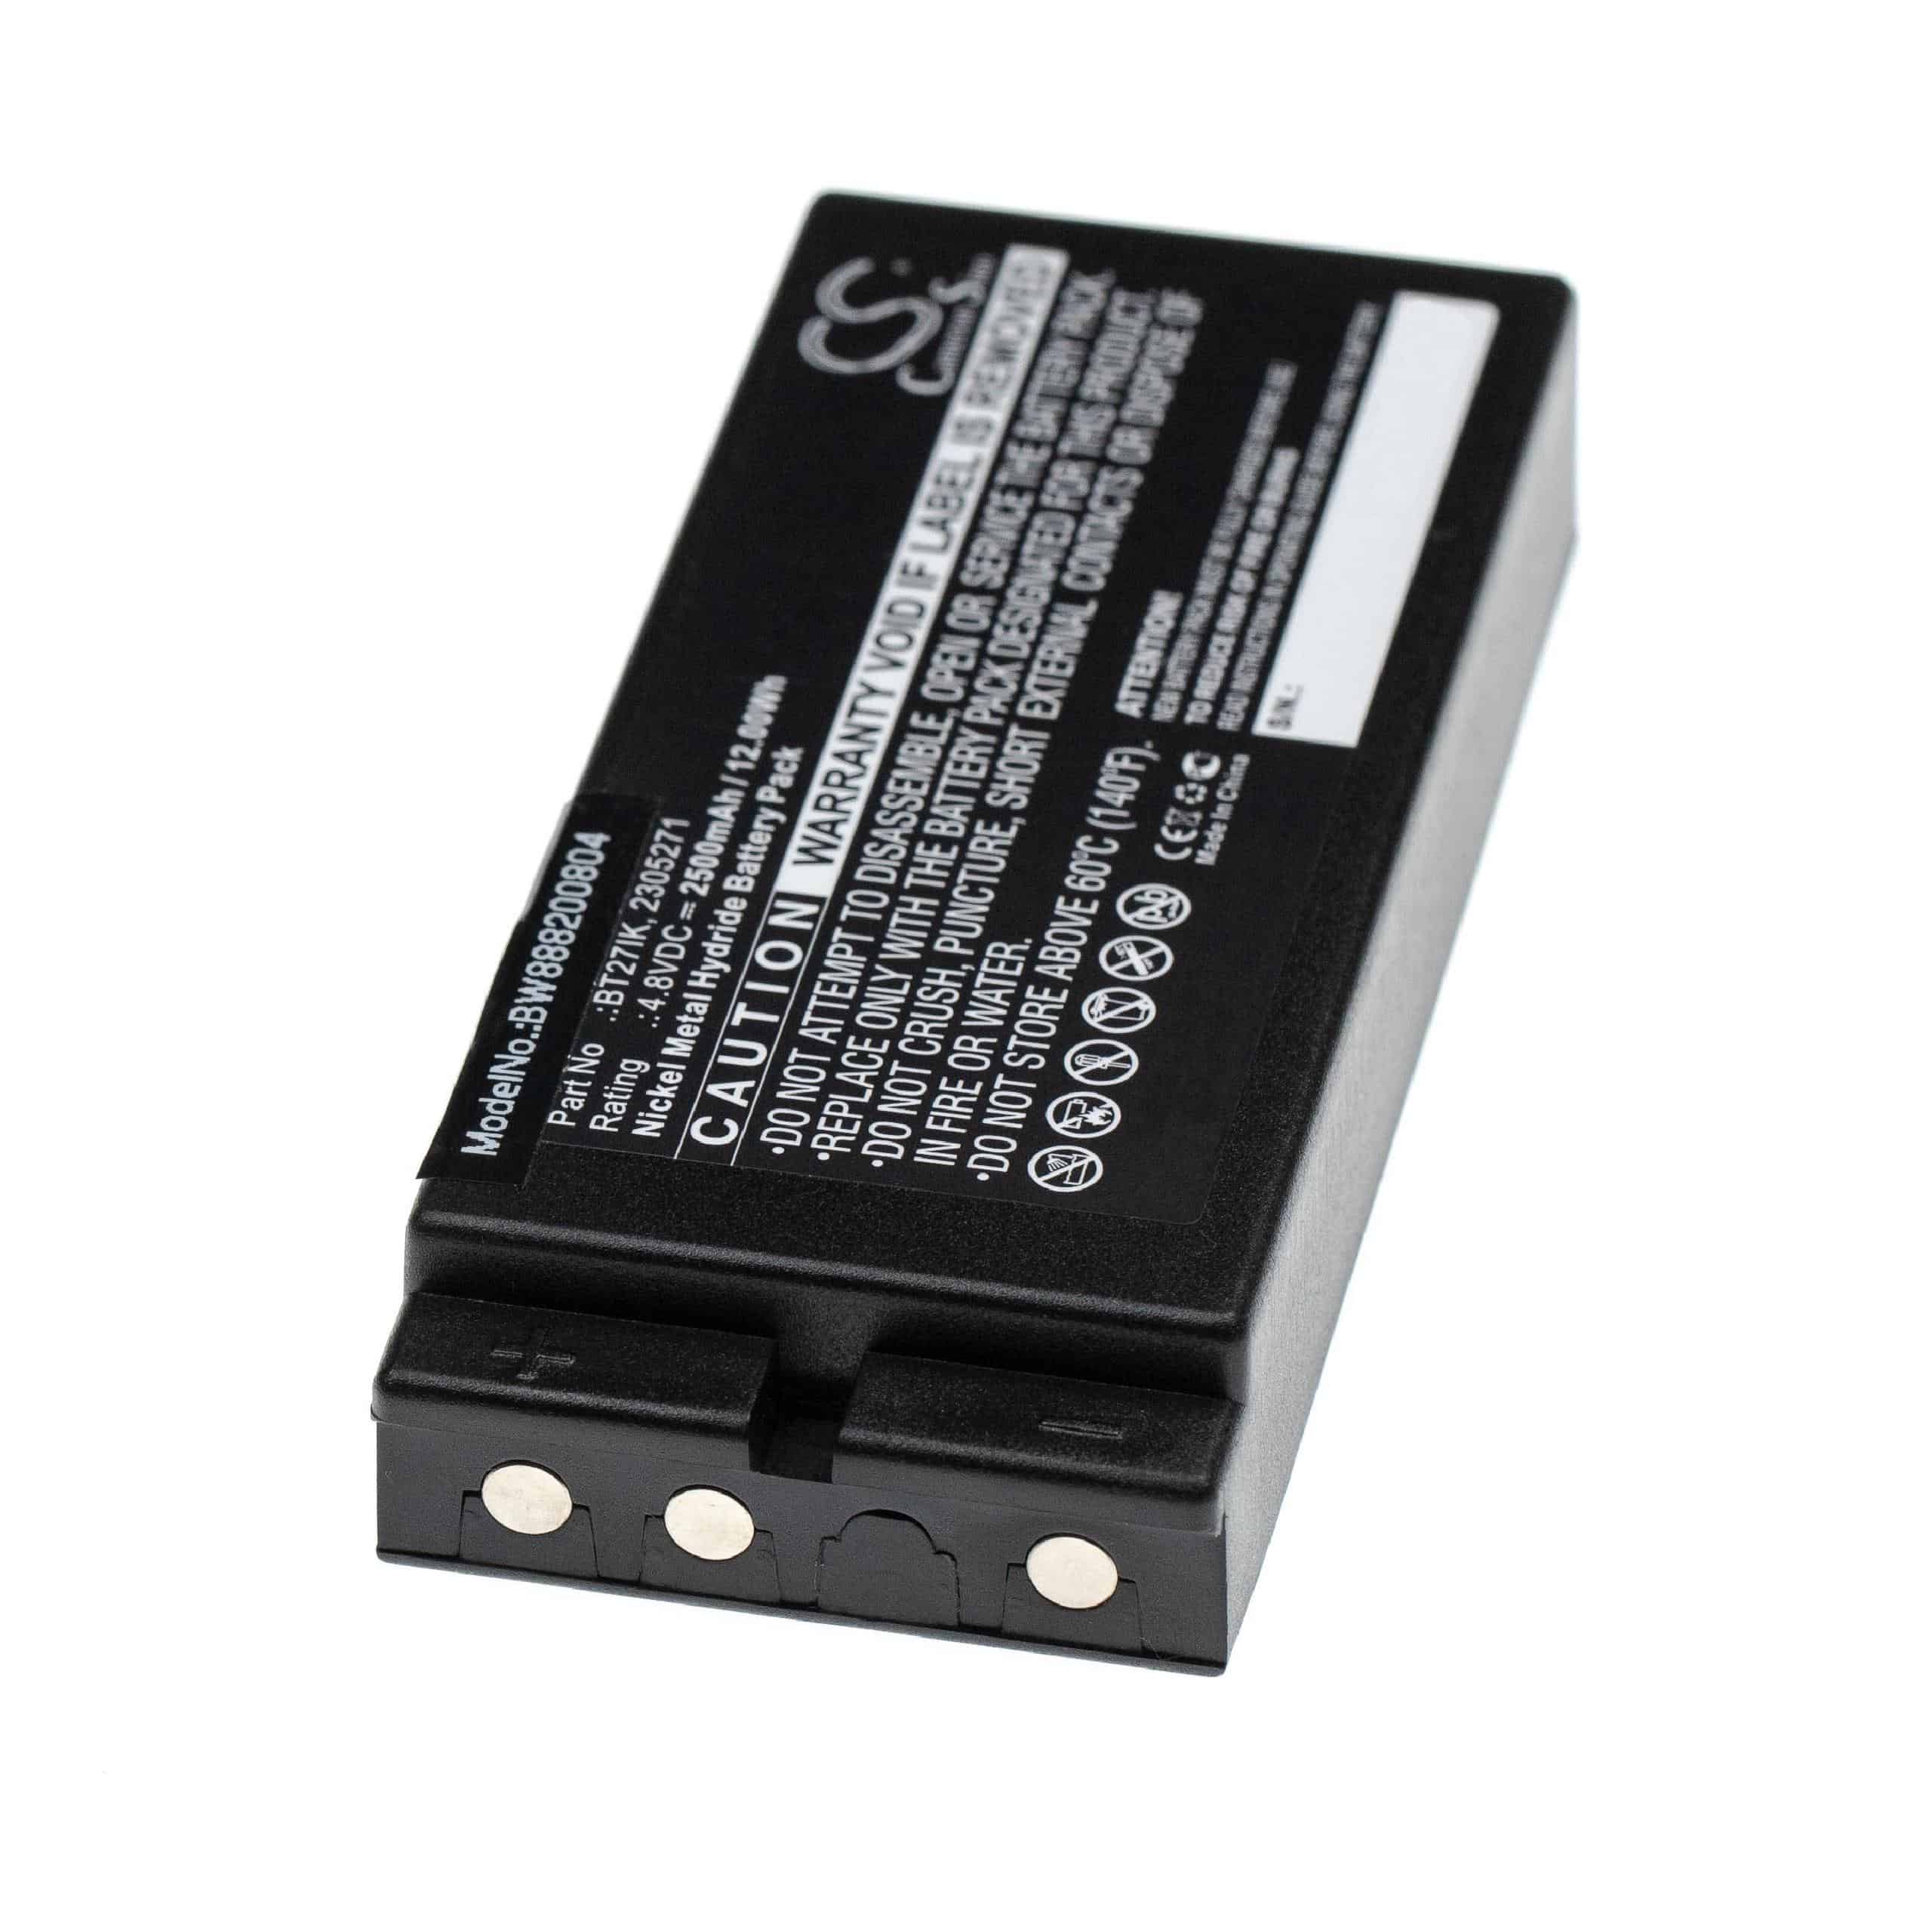 Industrial Remote Control Battery Replacement for Danfoss 2305271, BT24IK - 2500mAh 4.8V NiMH